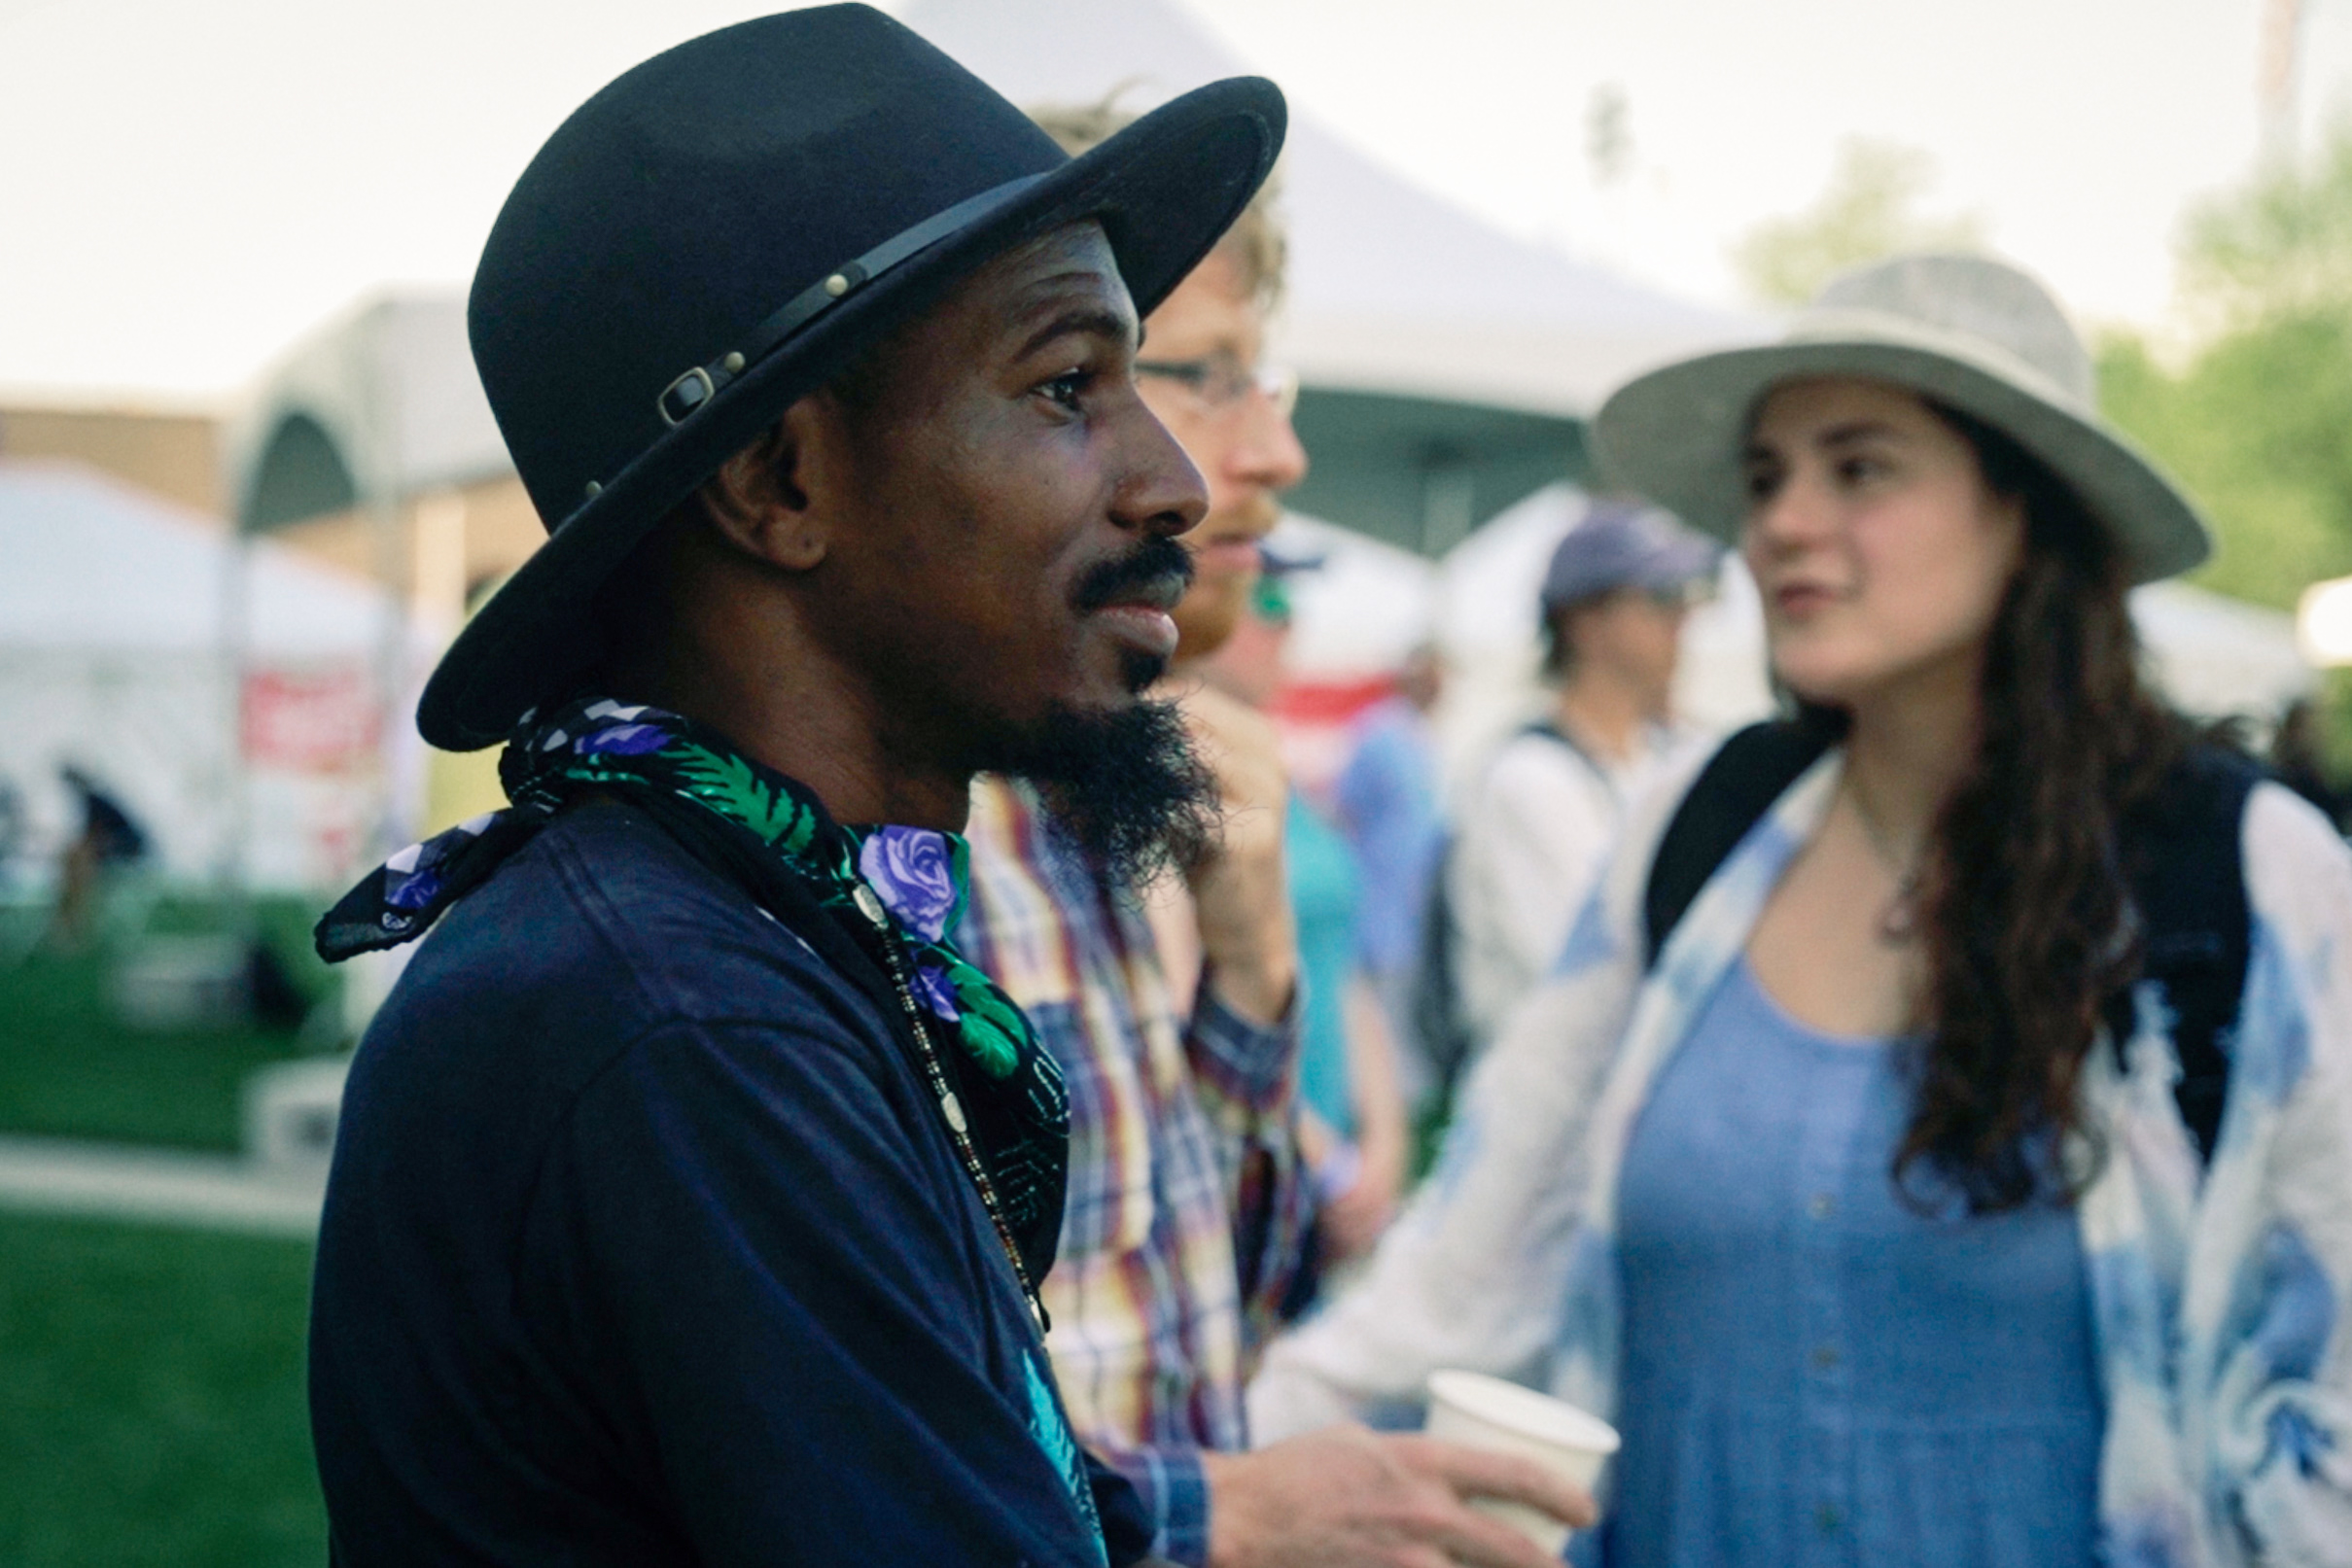 PHOTO: Travis London attends the Climate Justice and Joy event in Baton Rouge, La.